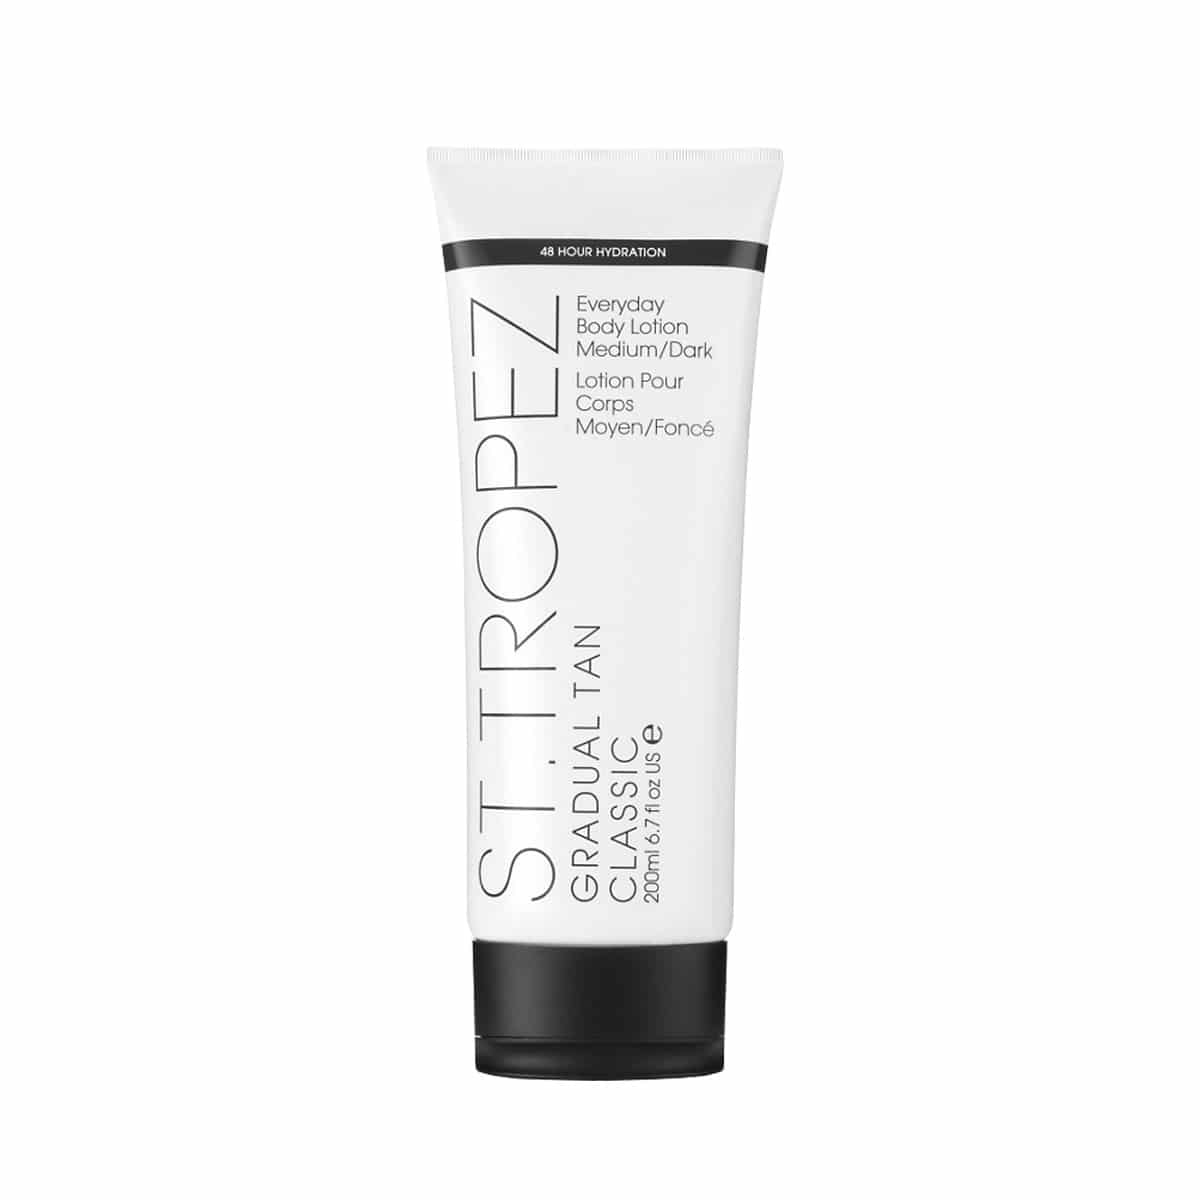 St Tropez Every Day Gradual Tan Lotion, $39.95 from Farmers